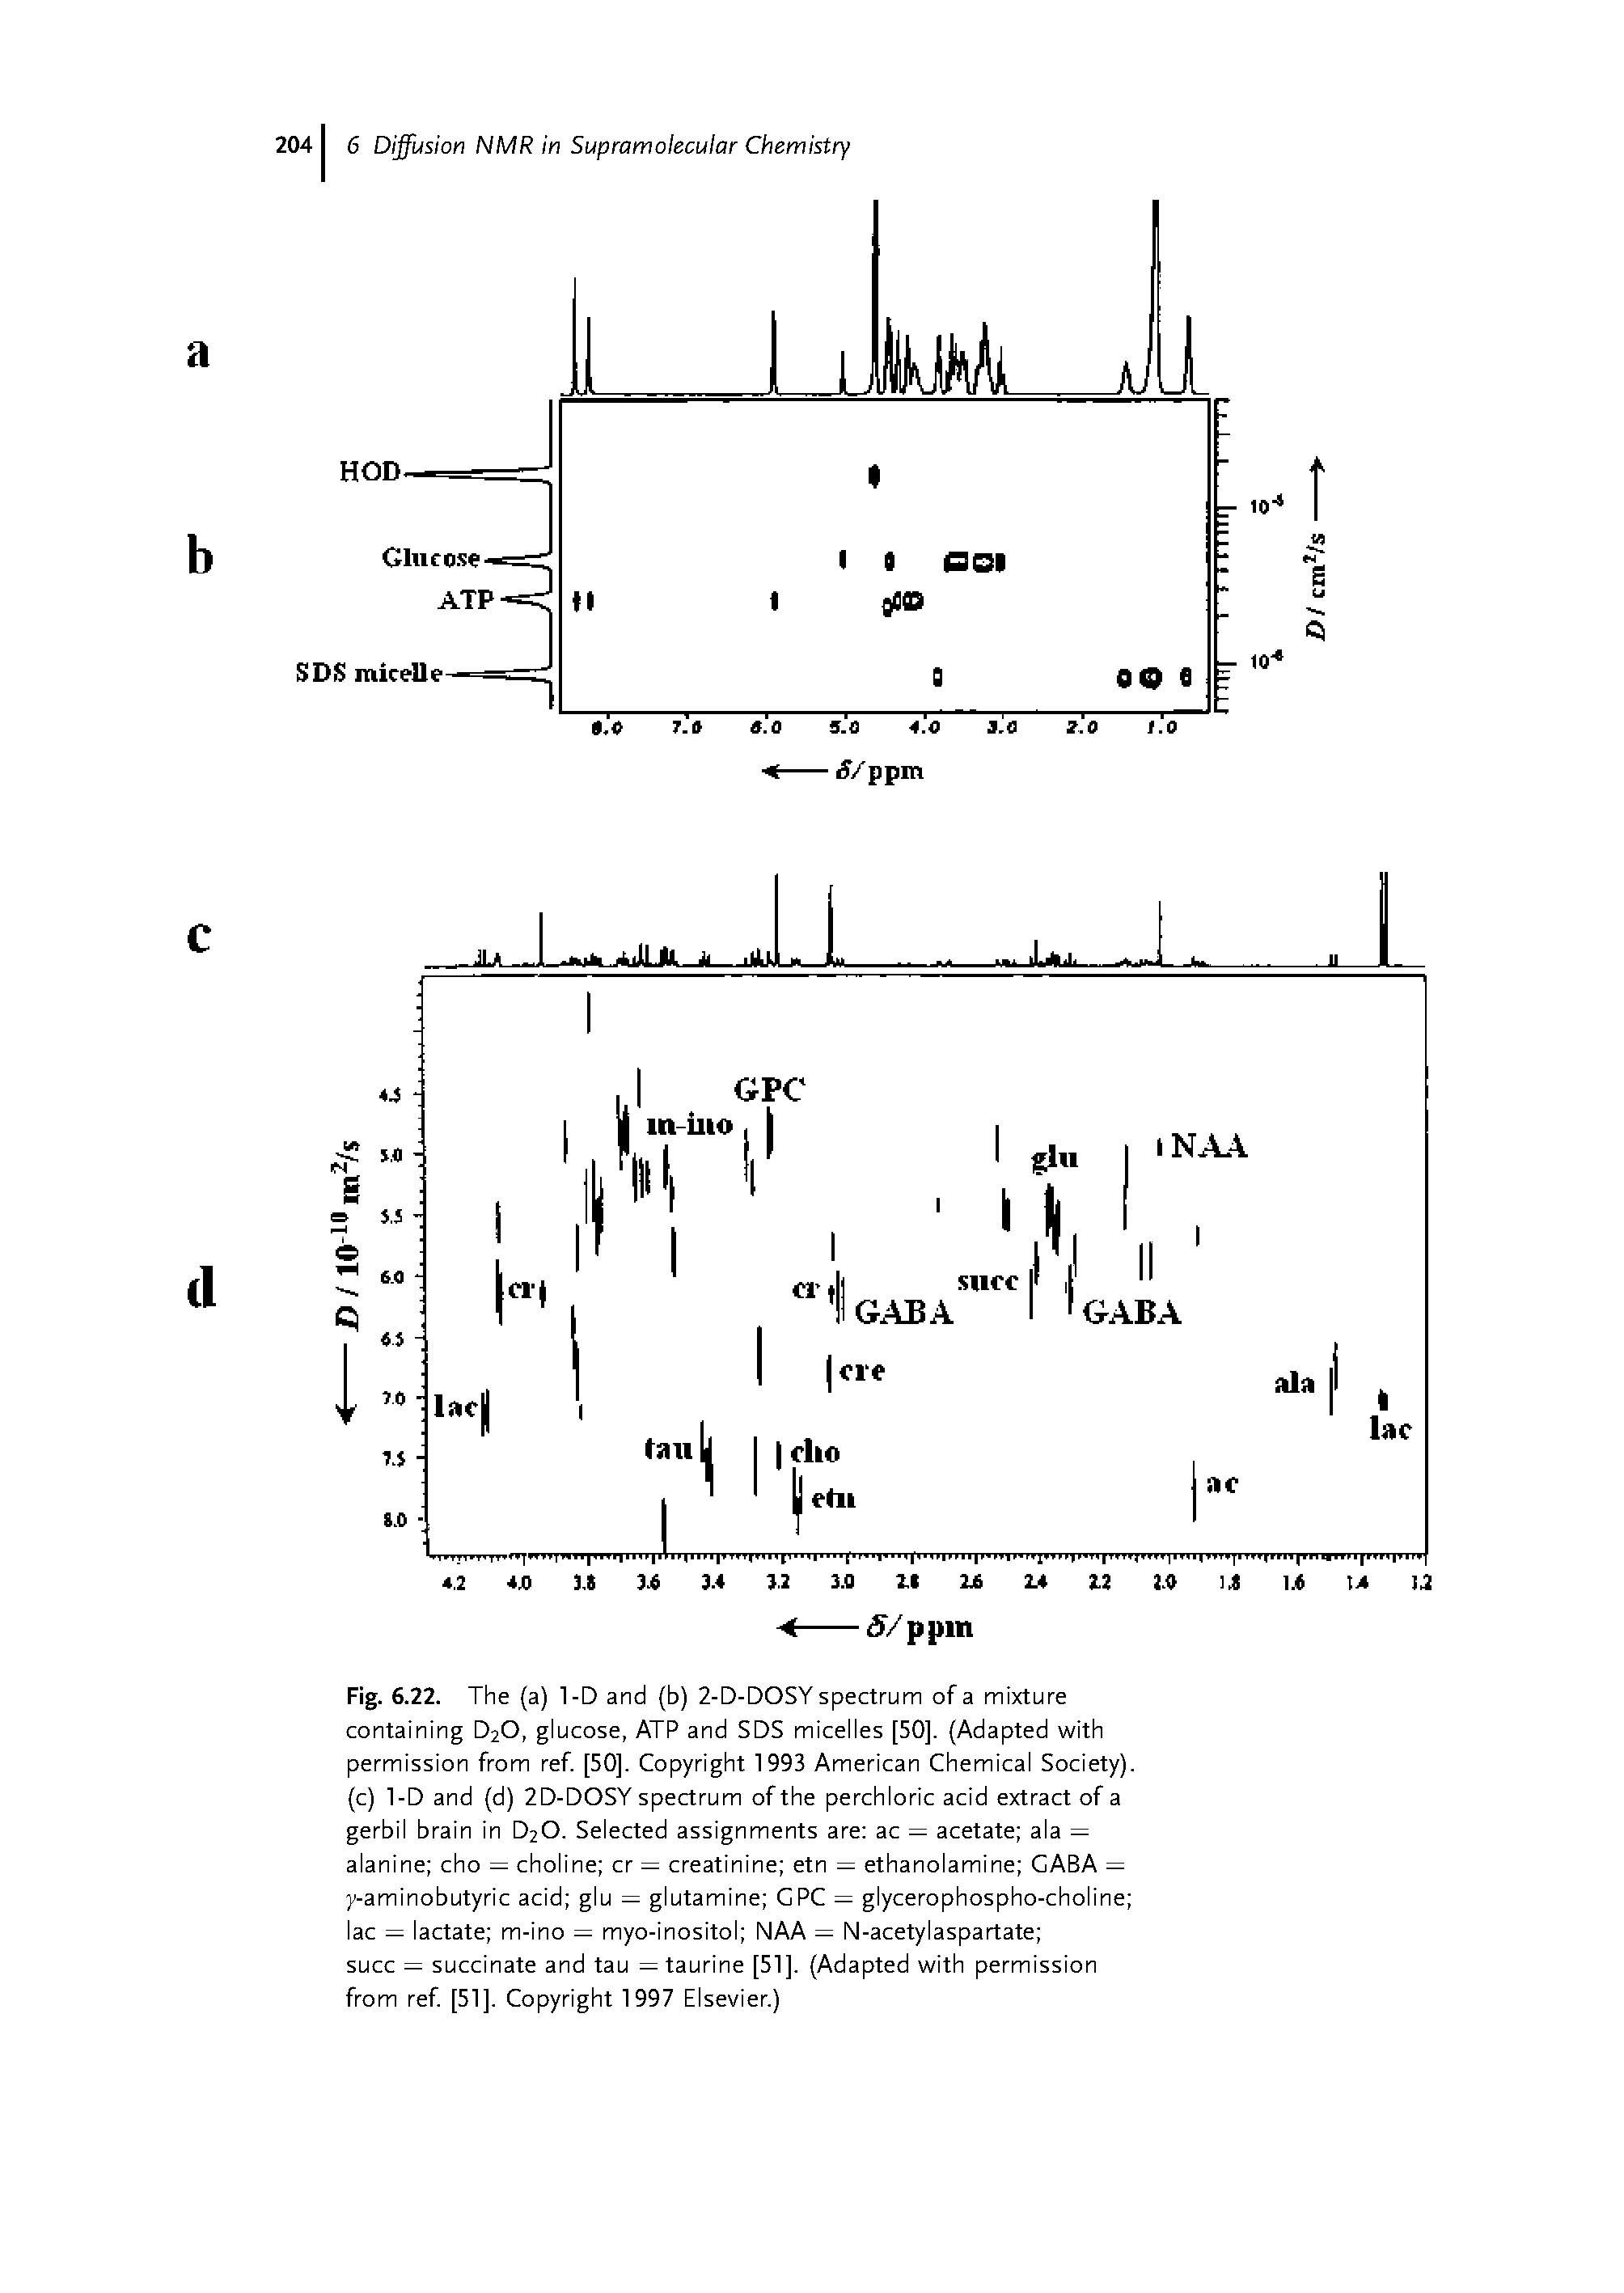 Fig. 6.22. The (a) 1-D and (b) 2-D-DOSY spectrum of a mixture containing D2O, glucose, ATP and SDS micelles [50]. (Adapted with permission from ref. [50]. Copyright 1993 American Chemical Society), (c) 1-D and (d) 2D-DOSY spectrum of the perchloric acid extract of a gerbil brain in D2O. Selected assignments are ac — acetate ala — alanine cho — choline cr — creatinine etn — ethanolamine GABA — y-aminobutyric acid glu — glutamine CPC — glycerophospho-choline lac — lactate m-ino — myo-inositol NAA — N-acetylaspartate succ — succinate and tau = taurine [51]. (Adapted with permission from ref. [51]. Copyright 1997 Elsevier.)...